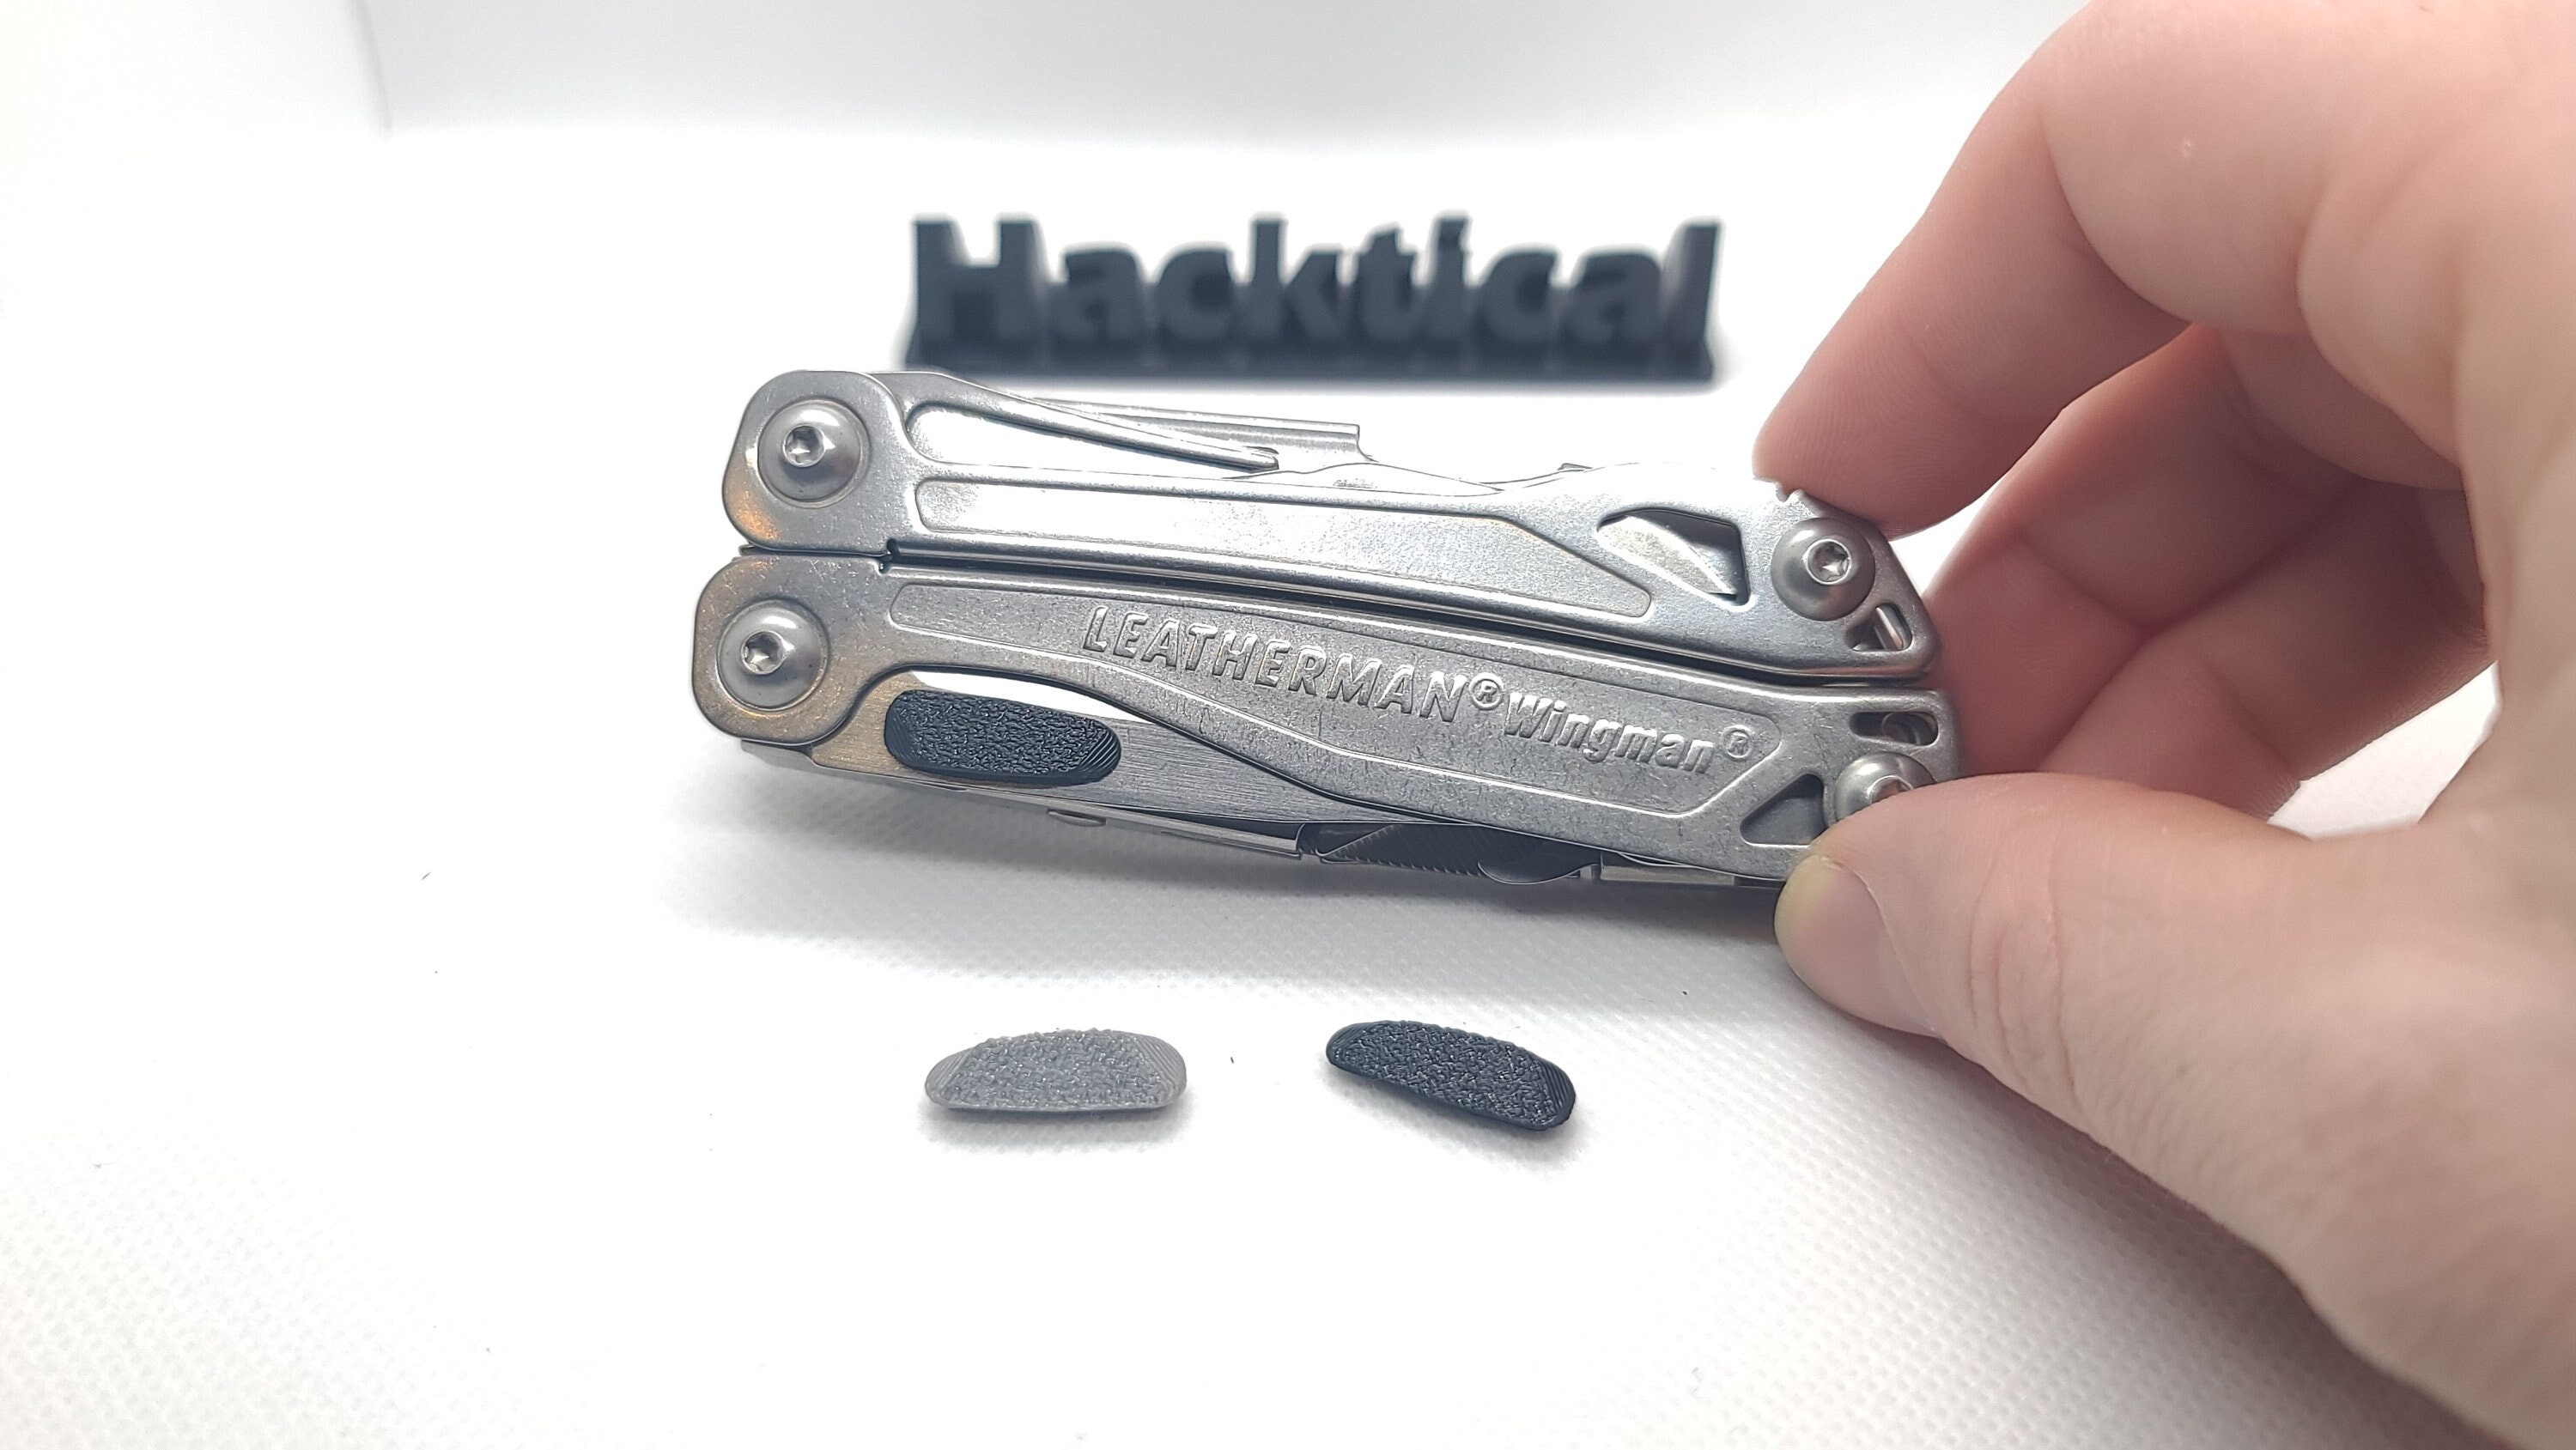 Package Opener Knife Multitool Accessory Leatherman Parts Mod